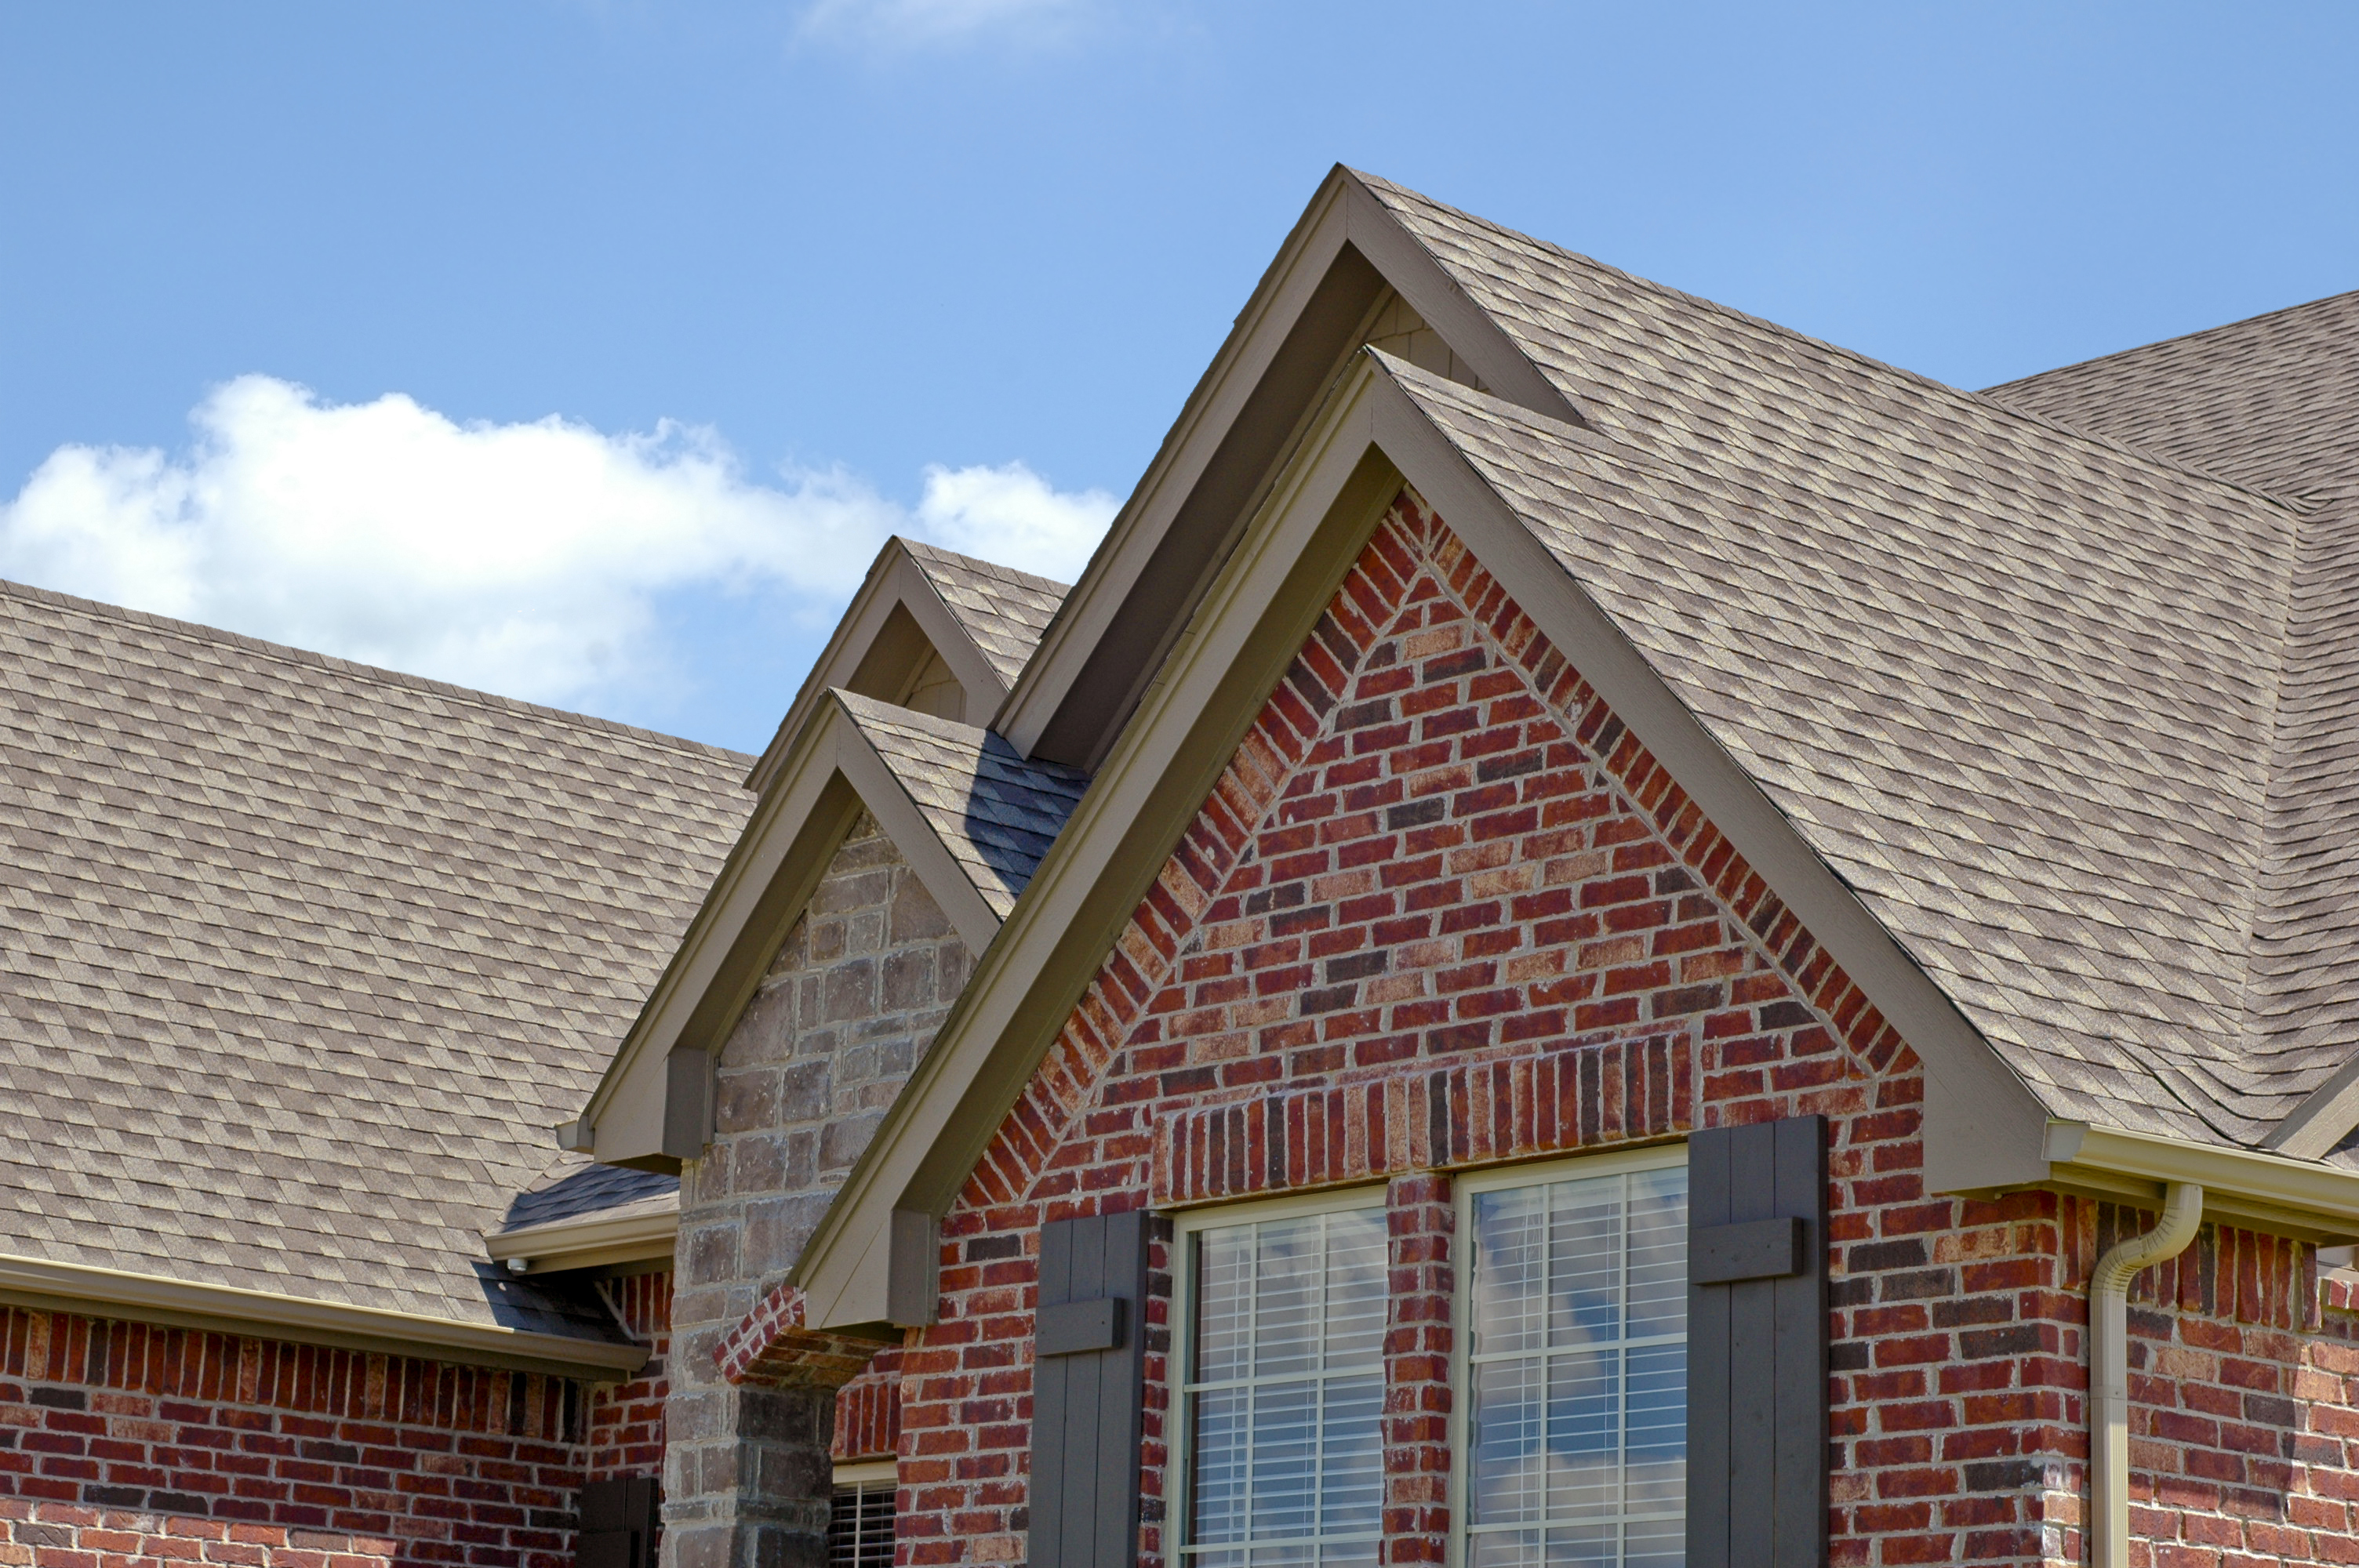 Call Titan Roofing LLC For Professional Mount Pleasant Roofing Repair or Replacement 843-647-3183